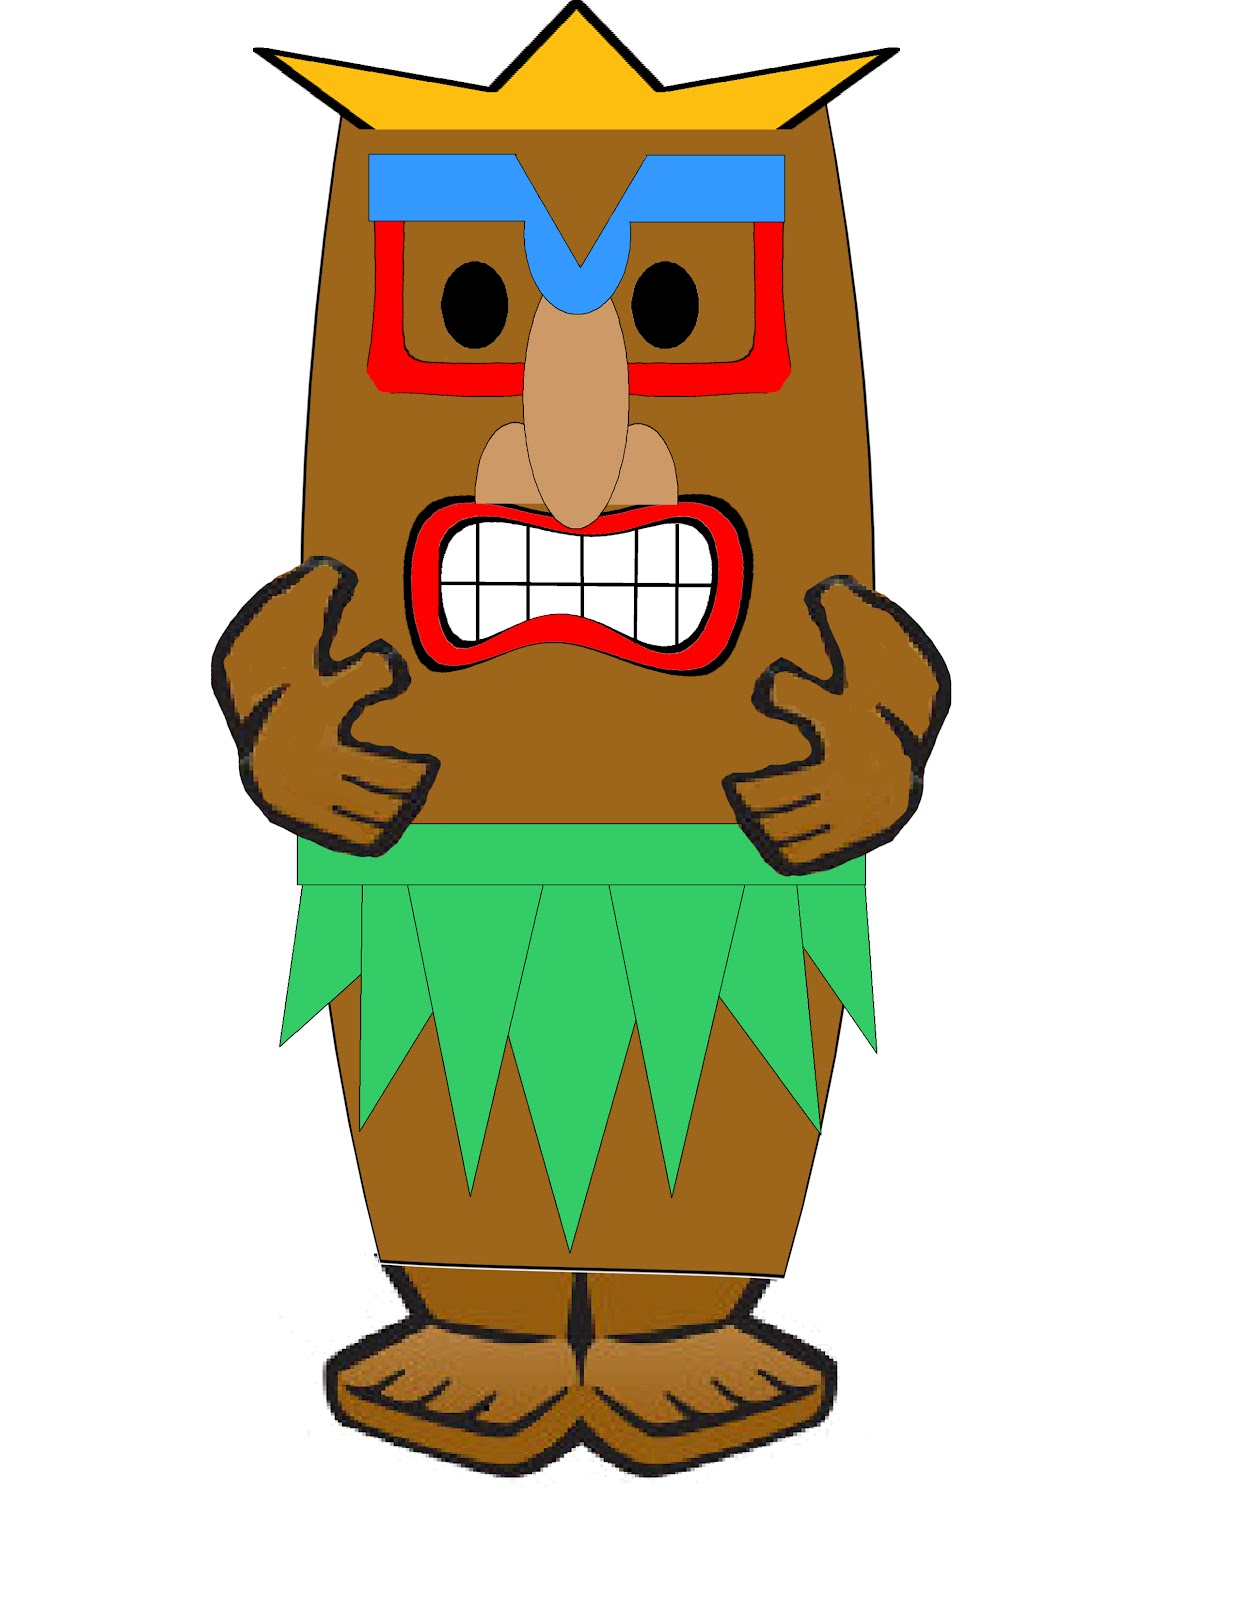 Luau clip art free clipart cliparts for you